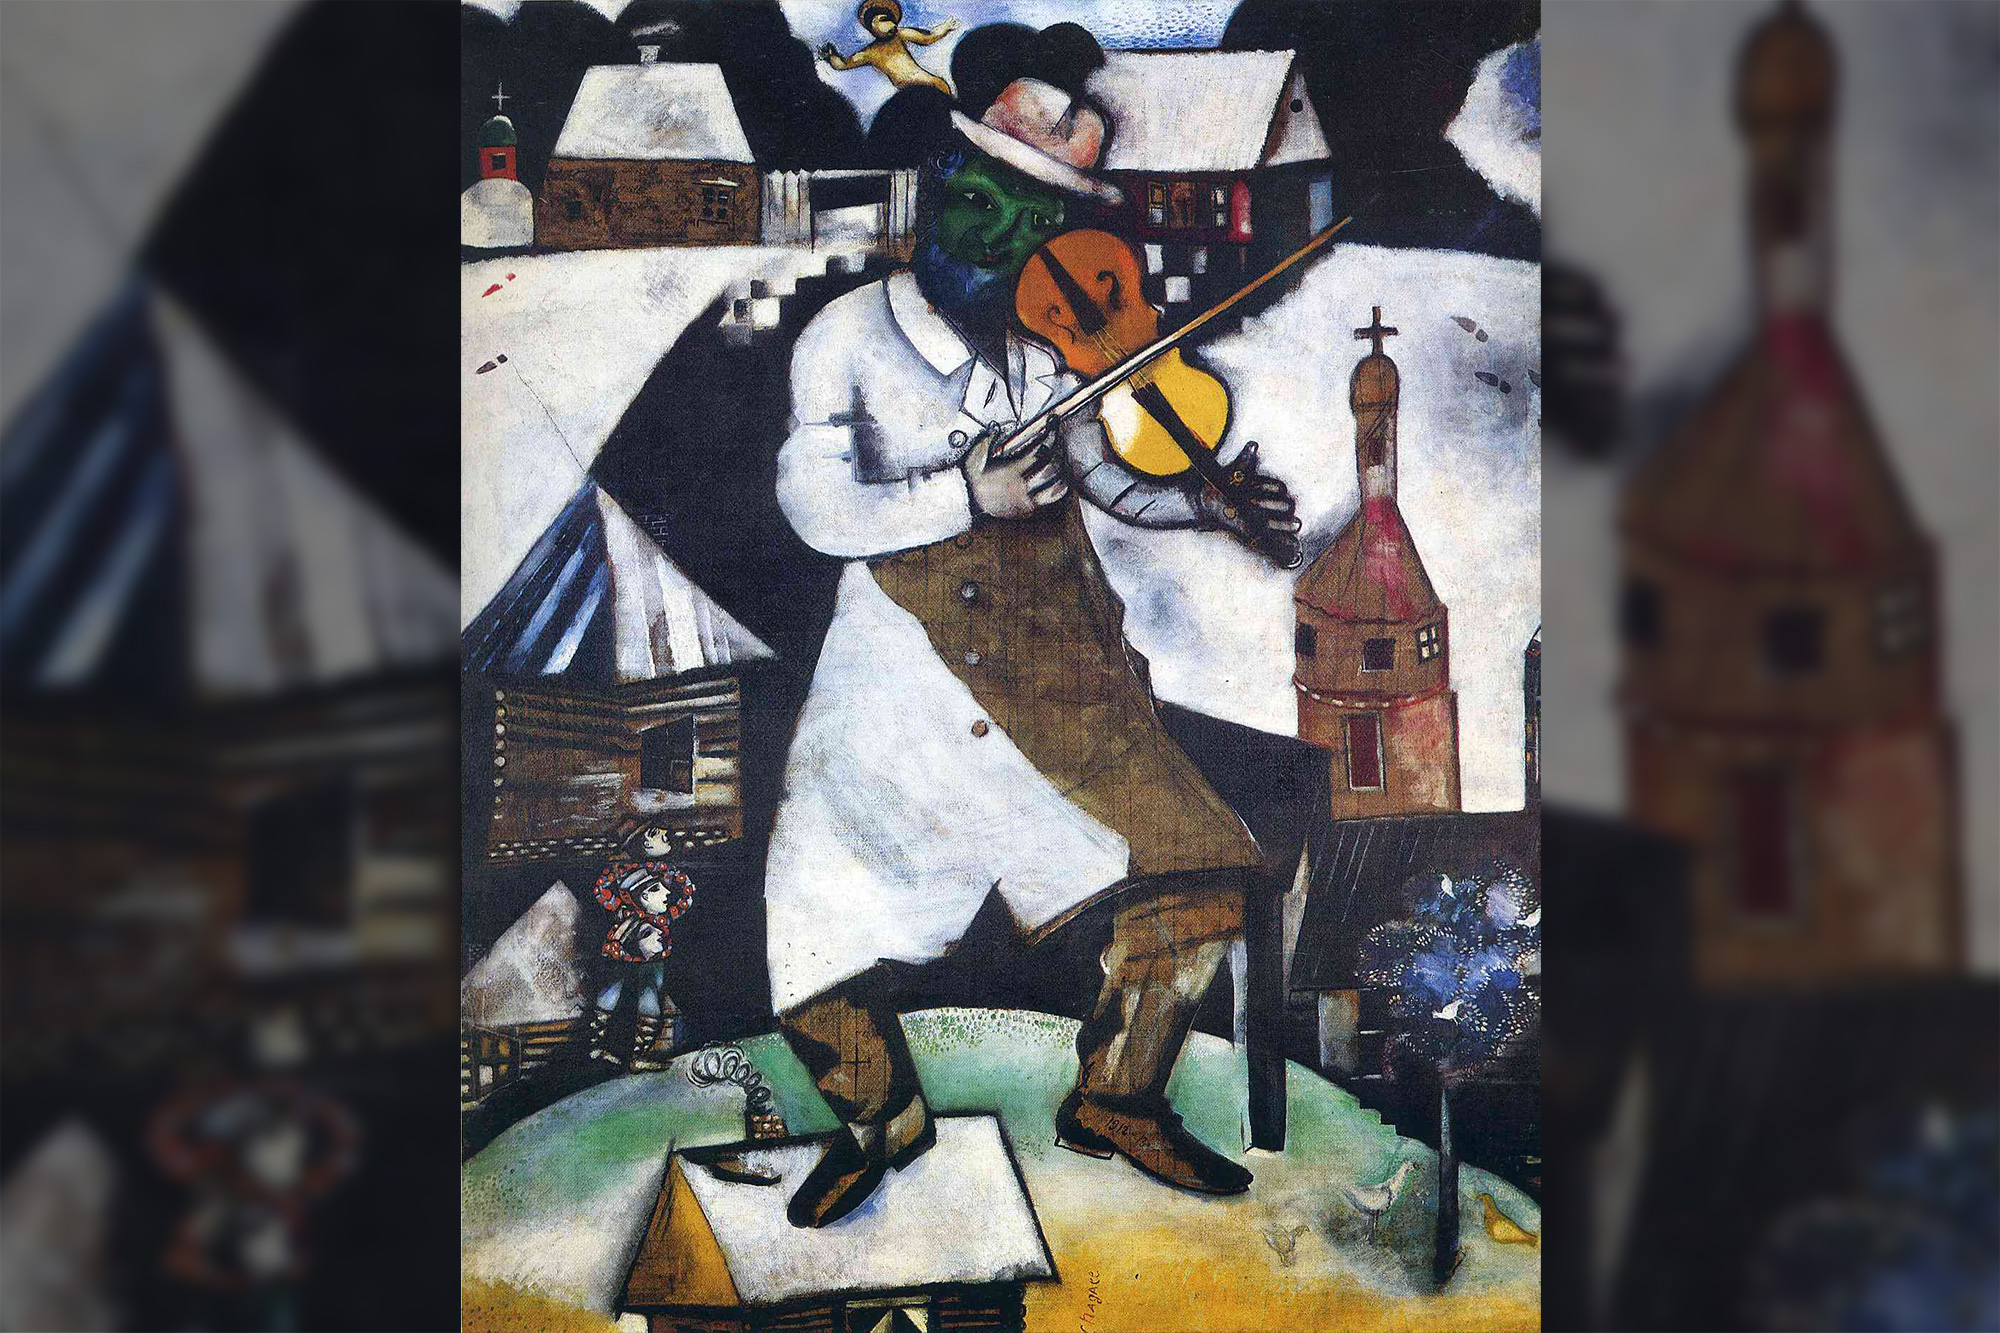 Marc Chagall's 1913 painting "The Fiddler" 